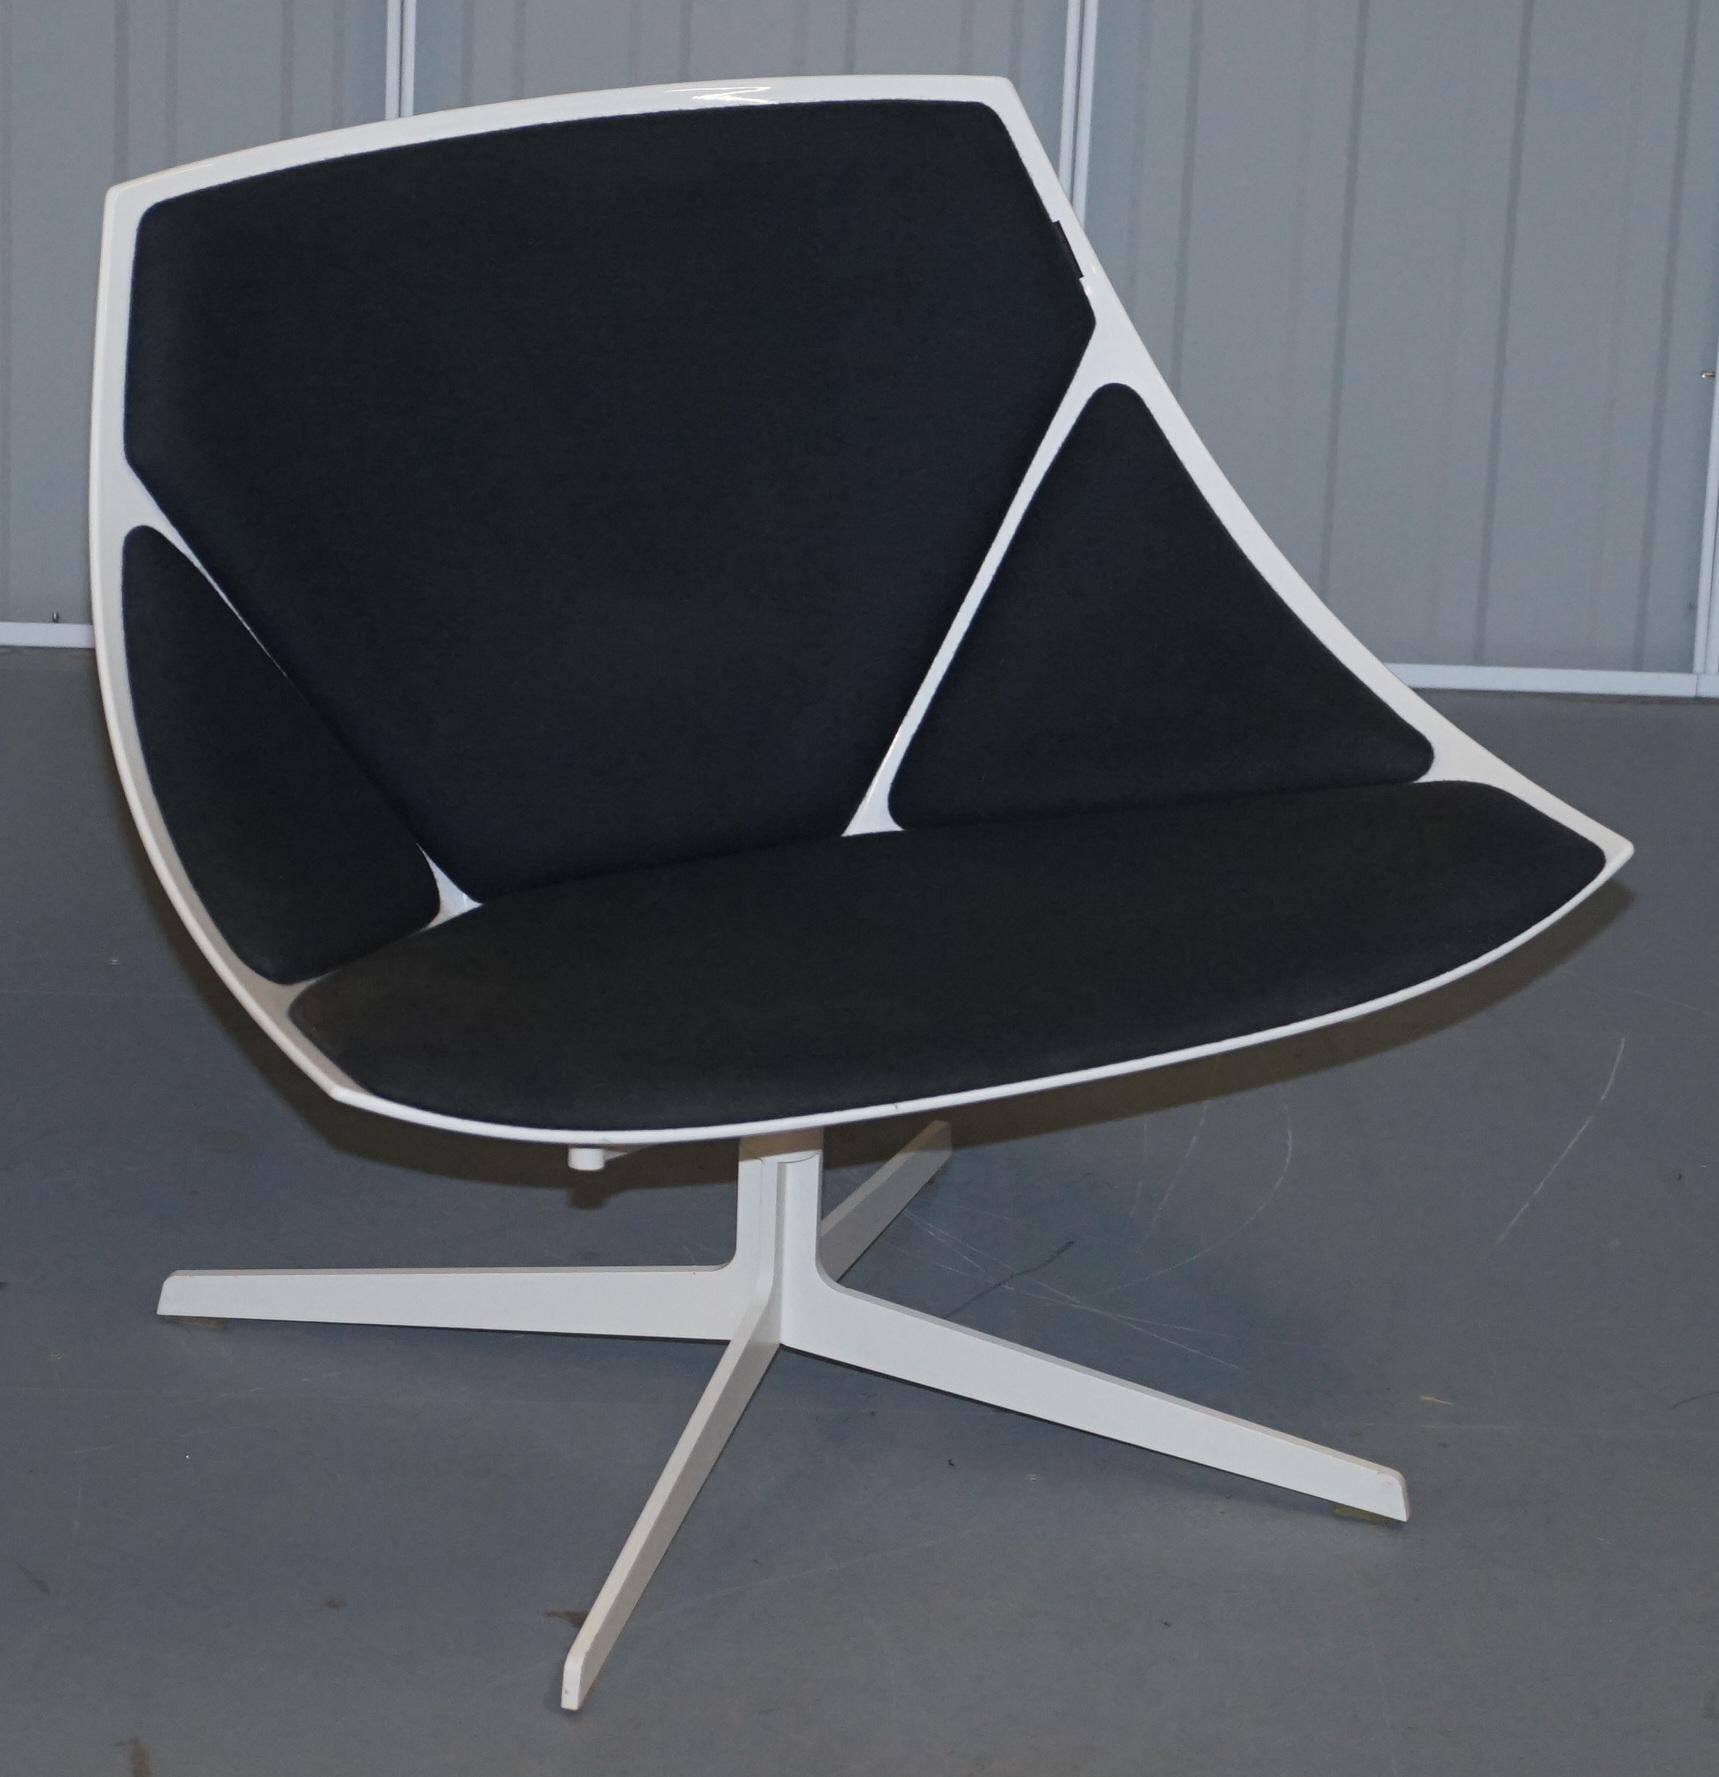 We are delighted to offer for sale this lovely white metal framed with fabric upholstery Fritz Hansen space lounge armchair designed by Jehs & laub

A very good looking comfortable designer armchair made by one of the greatest furniture designers